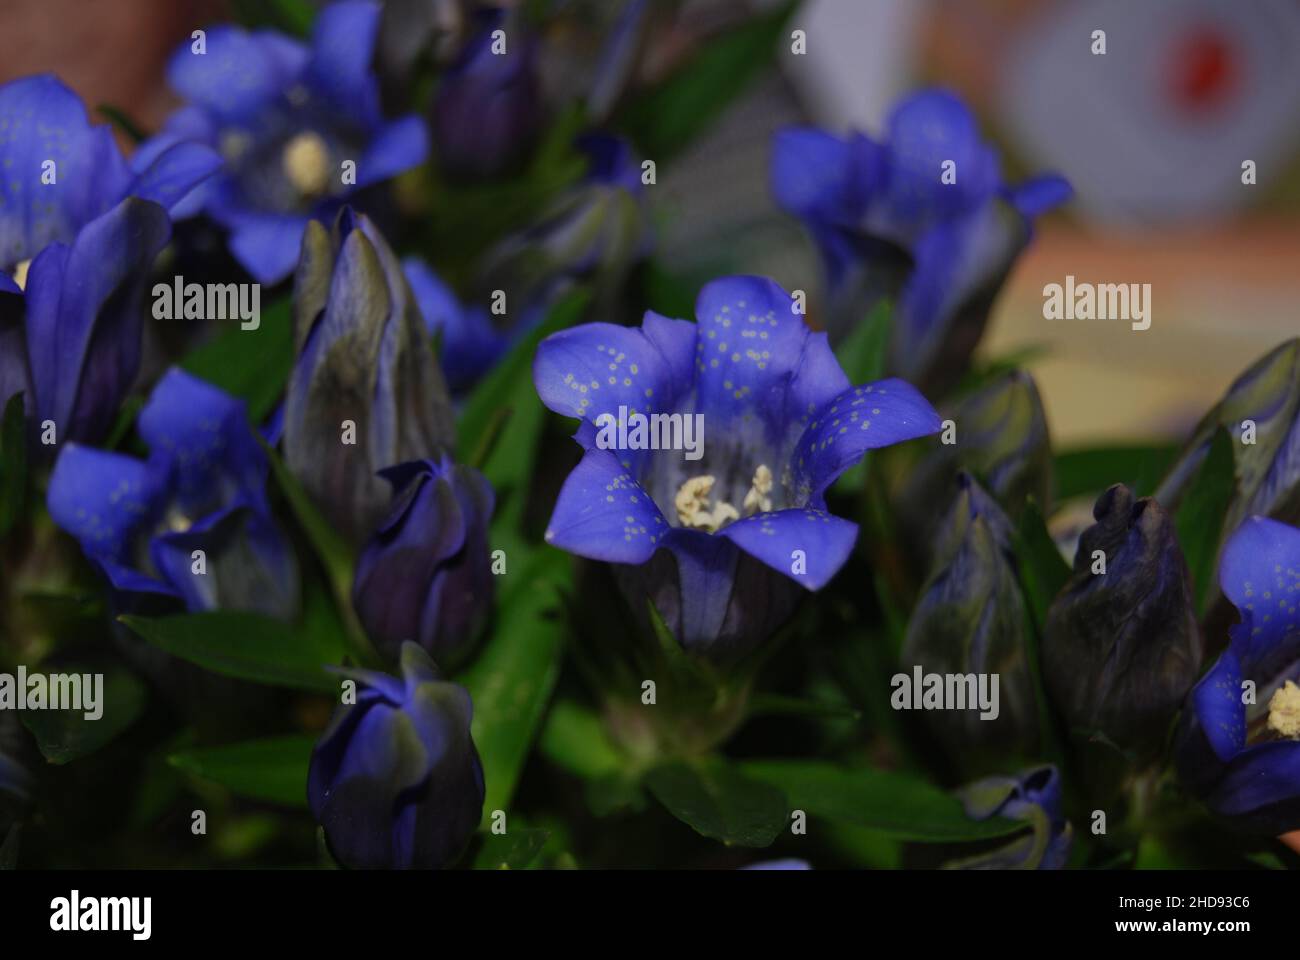 Closeup of the Gentiana scabra, the Japanese gentian. Stock Photo